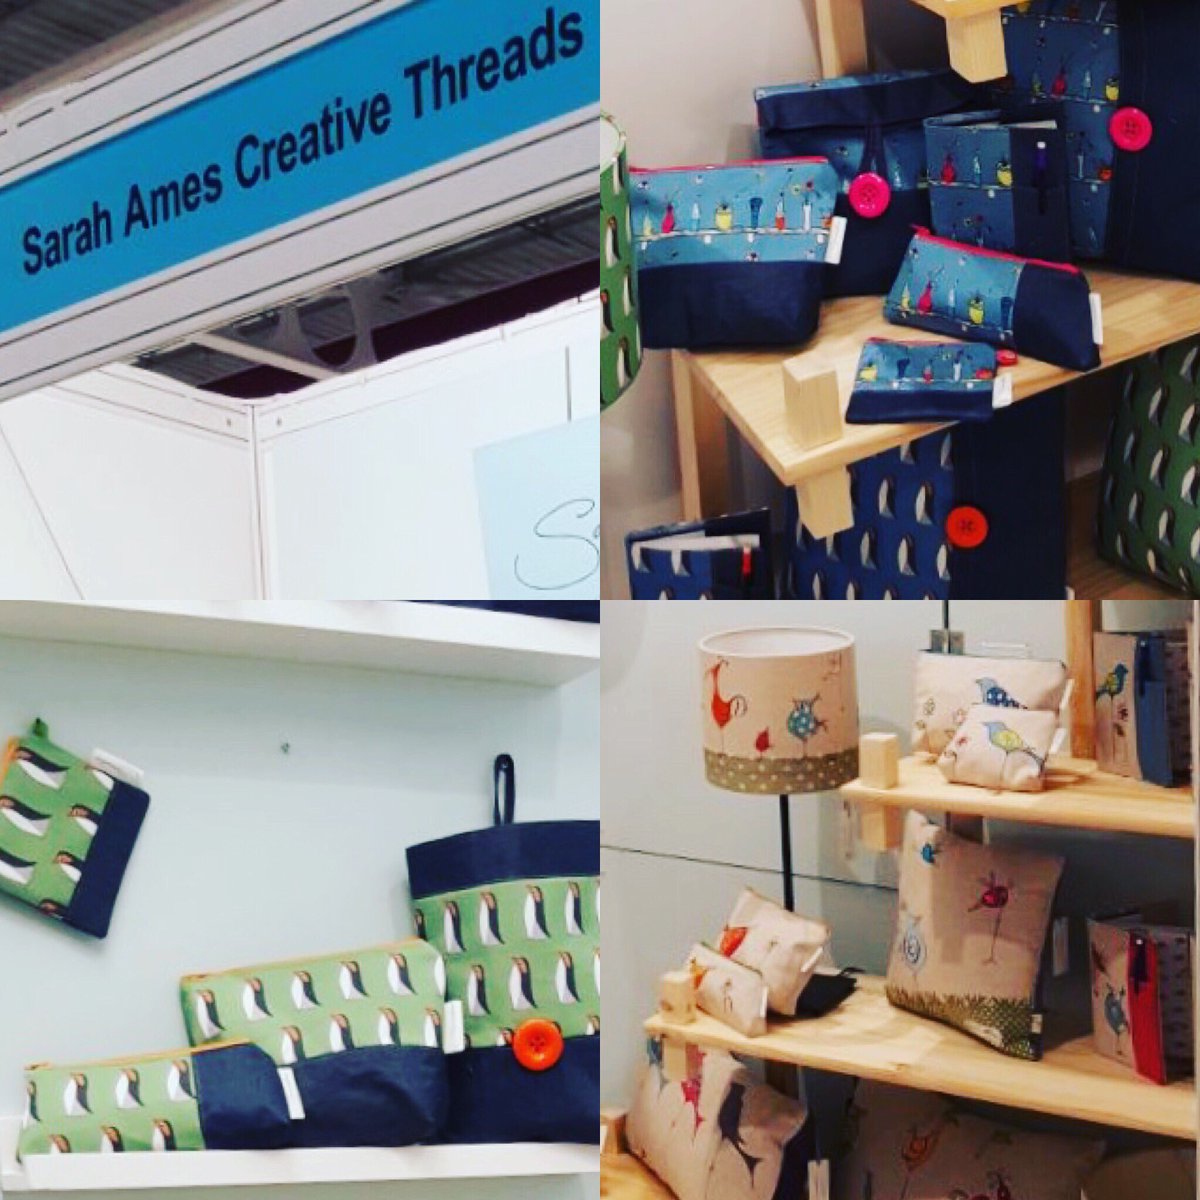 RT @CherrydidiUK: Be sure to check out #sarahamescreativethreads at this years @BCTF_Harrogate Good luck Sarah, I’m sure all those buyers will love your work as you do so well @CherrydidiUK 😉 #supporthandmade #textiledesign #harrogate #britishcraft @…